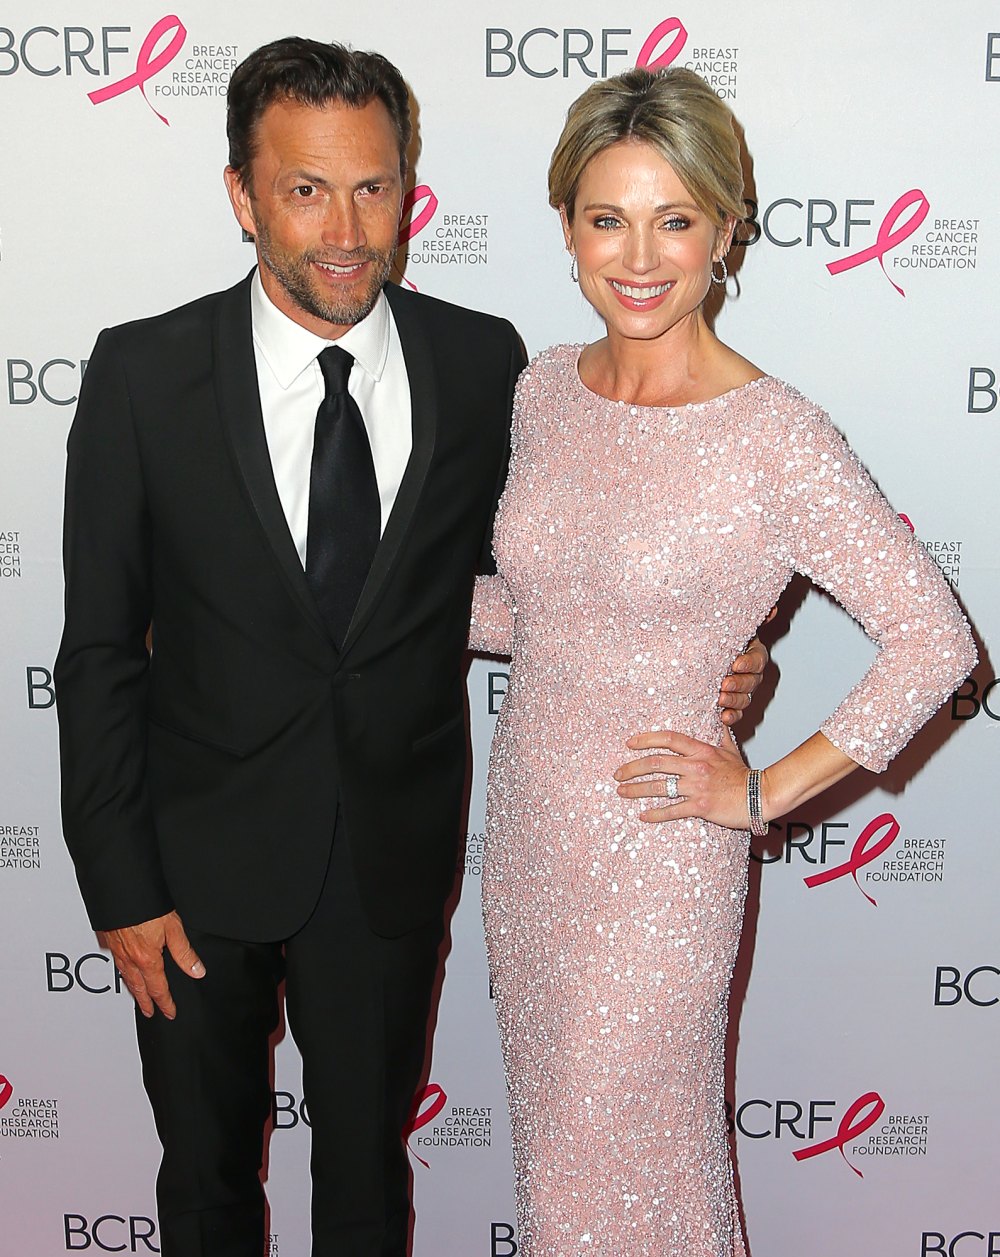 Good Morning America's Amy Robach and Husband Andrew Shue Sold Their New York Apartment Ahead of T.J. Holmes Affair Rumors: Details